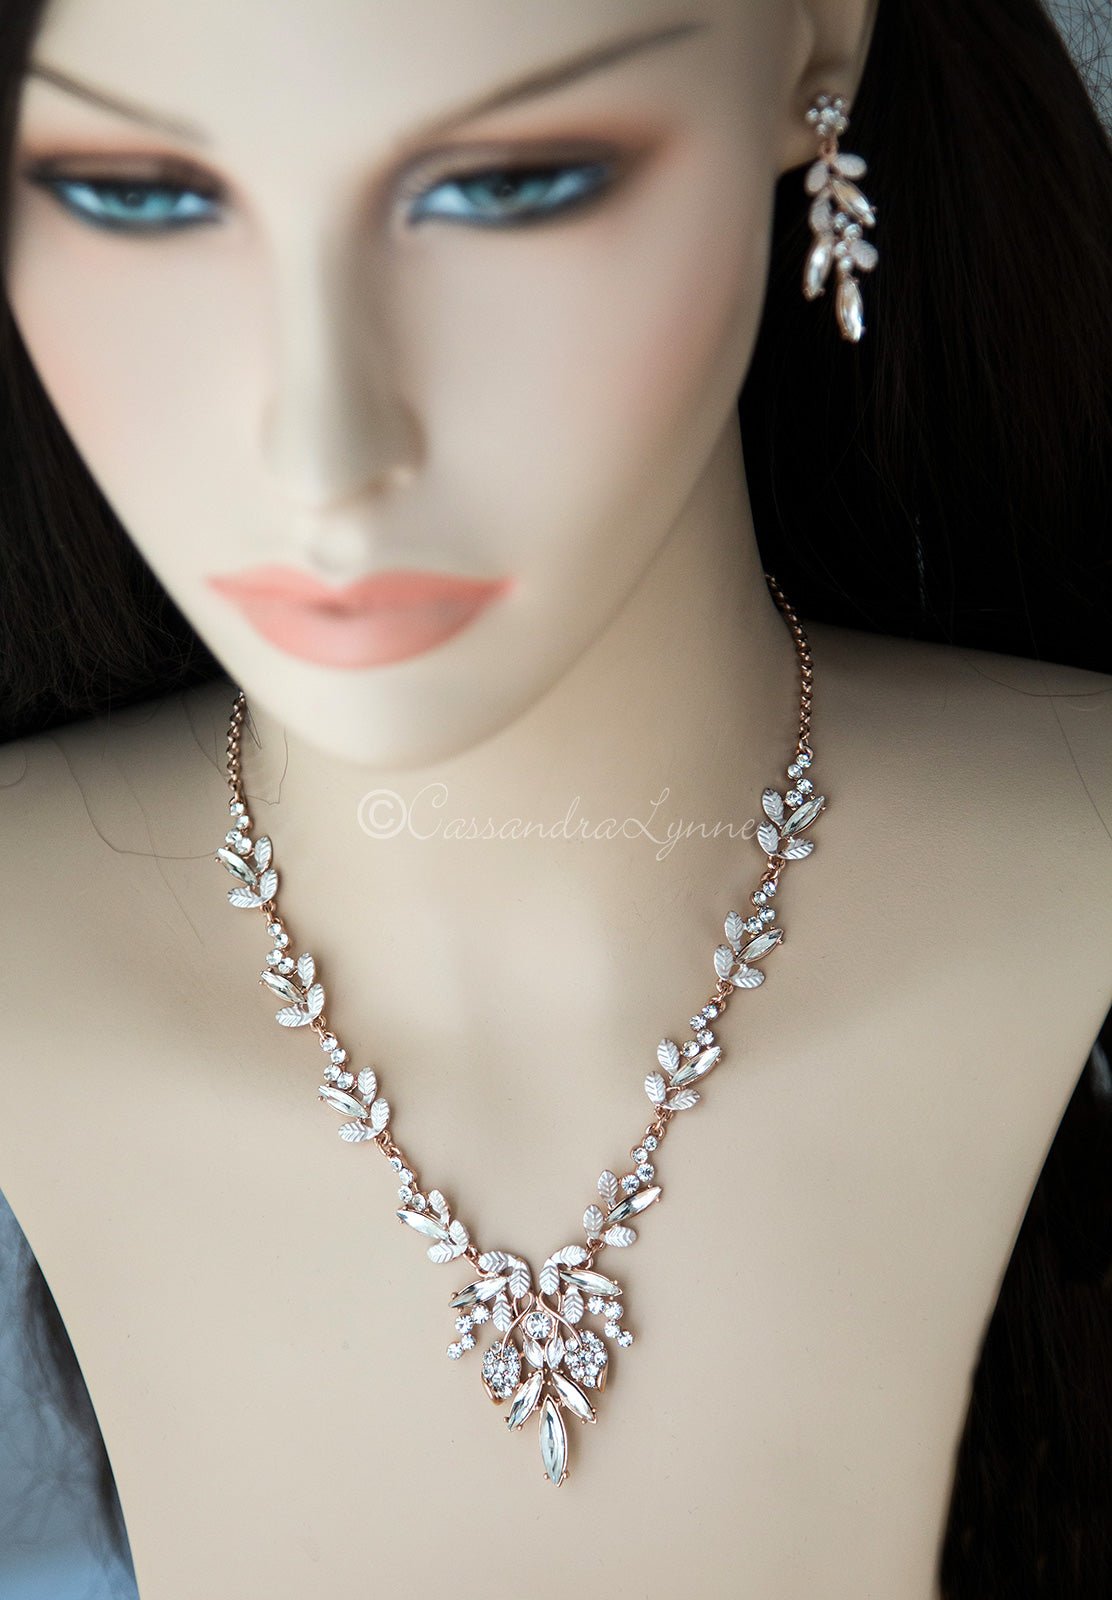 Bridal Necklace of Elongated Crystals - Cassandra Lynne